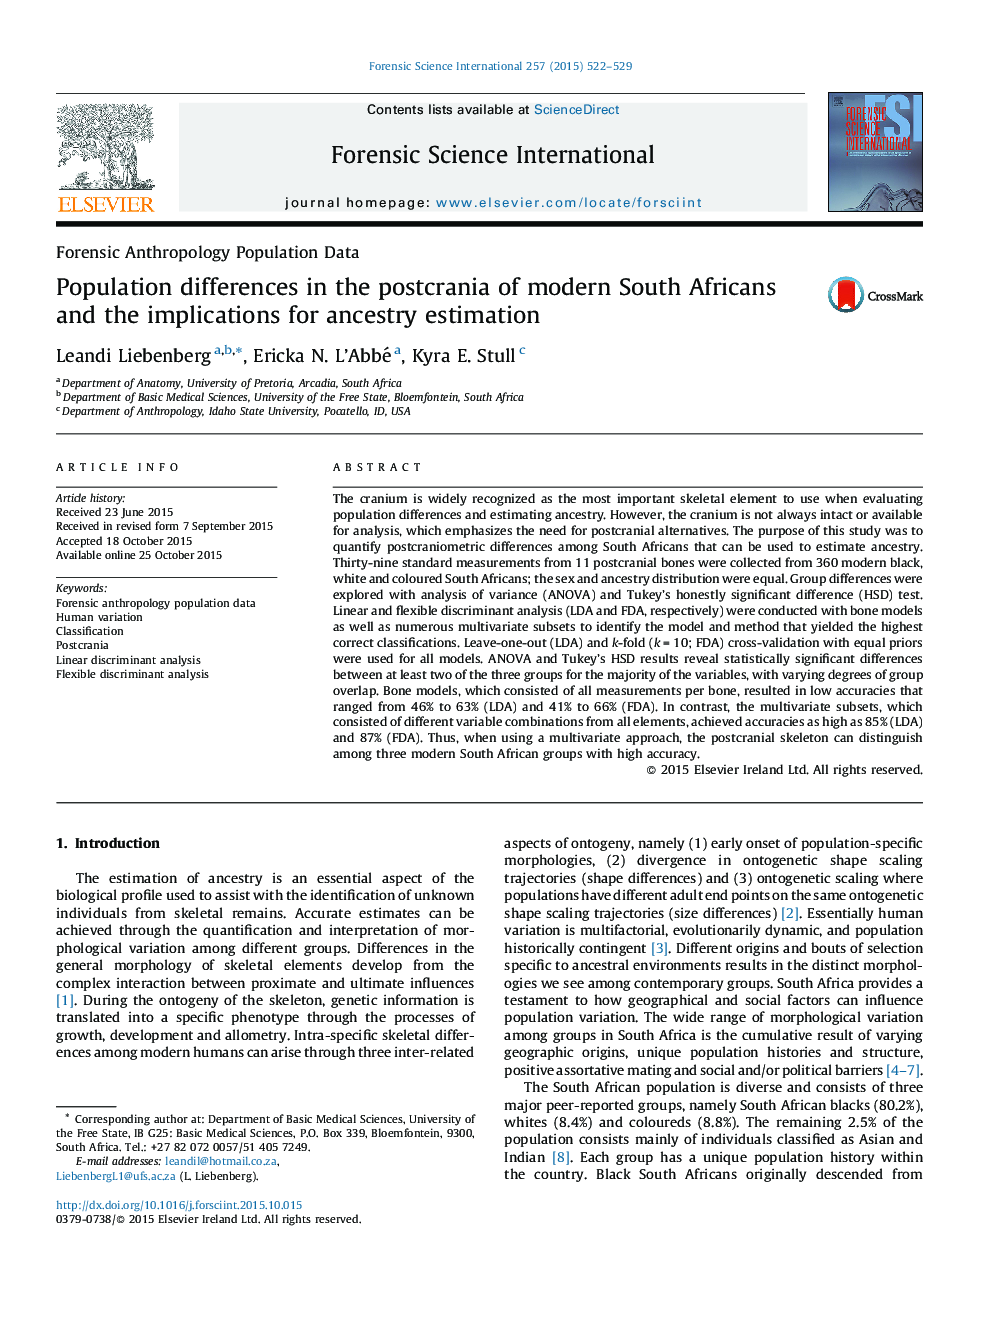 Population differences in the postcrania of modern South Africans and the implications for ancestry estimation